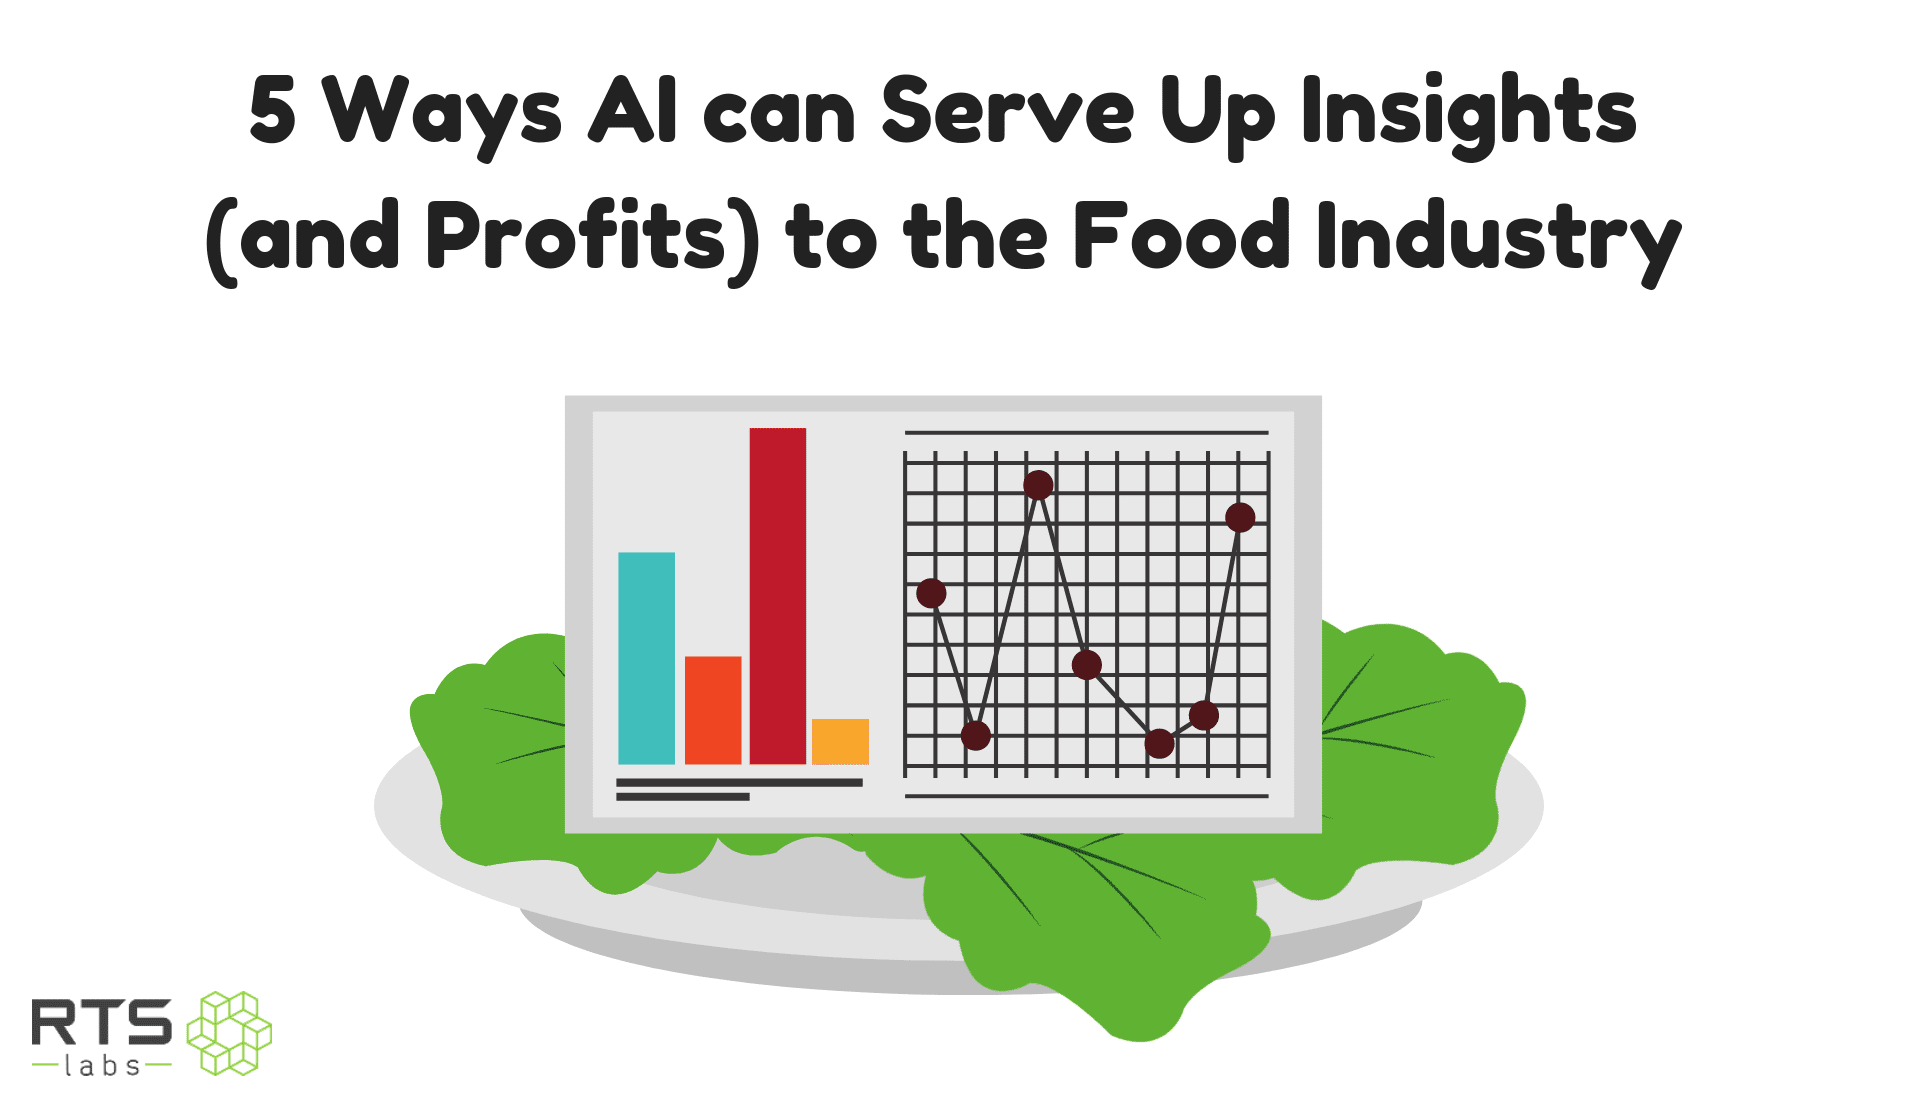 5 Ways AI Can Serve Up Insights (and Profits) to the Food Industry